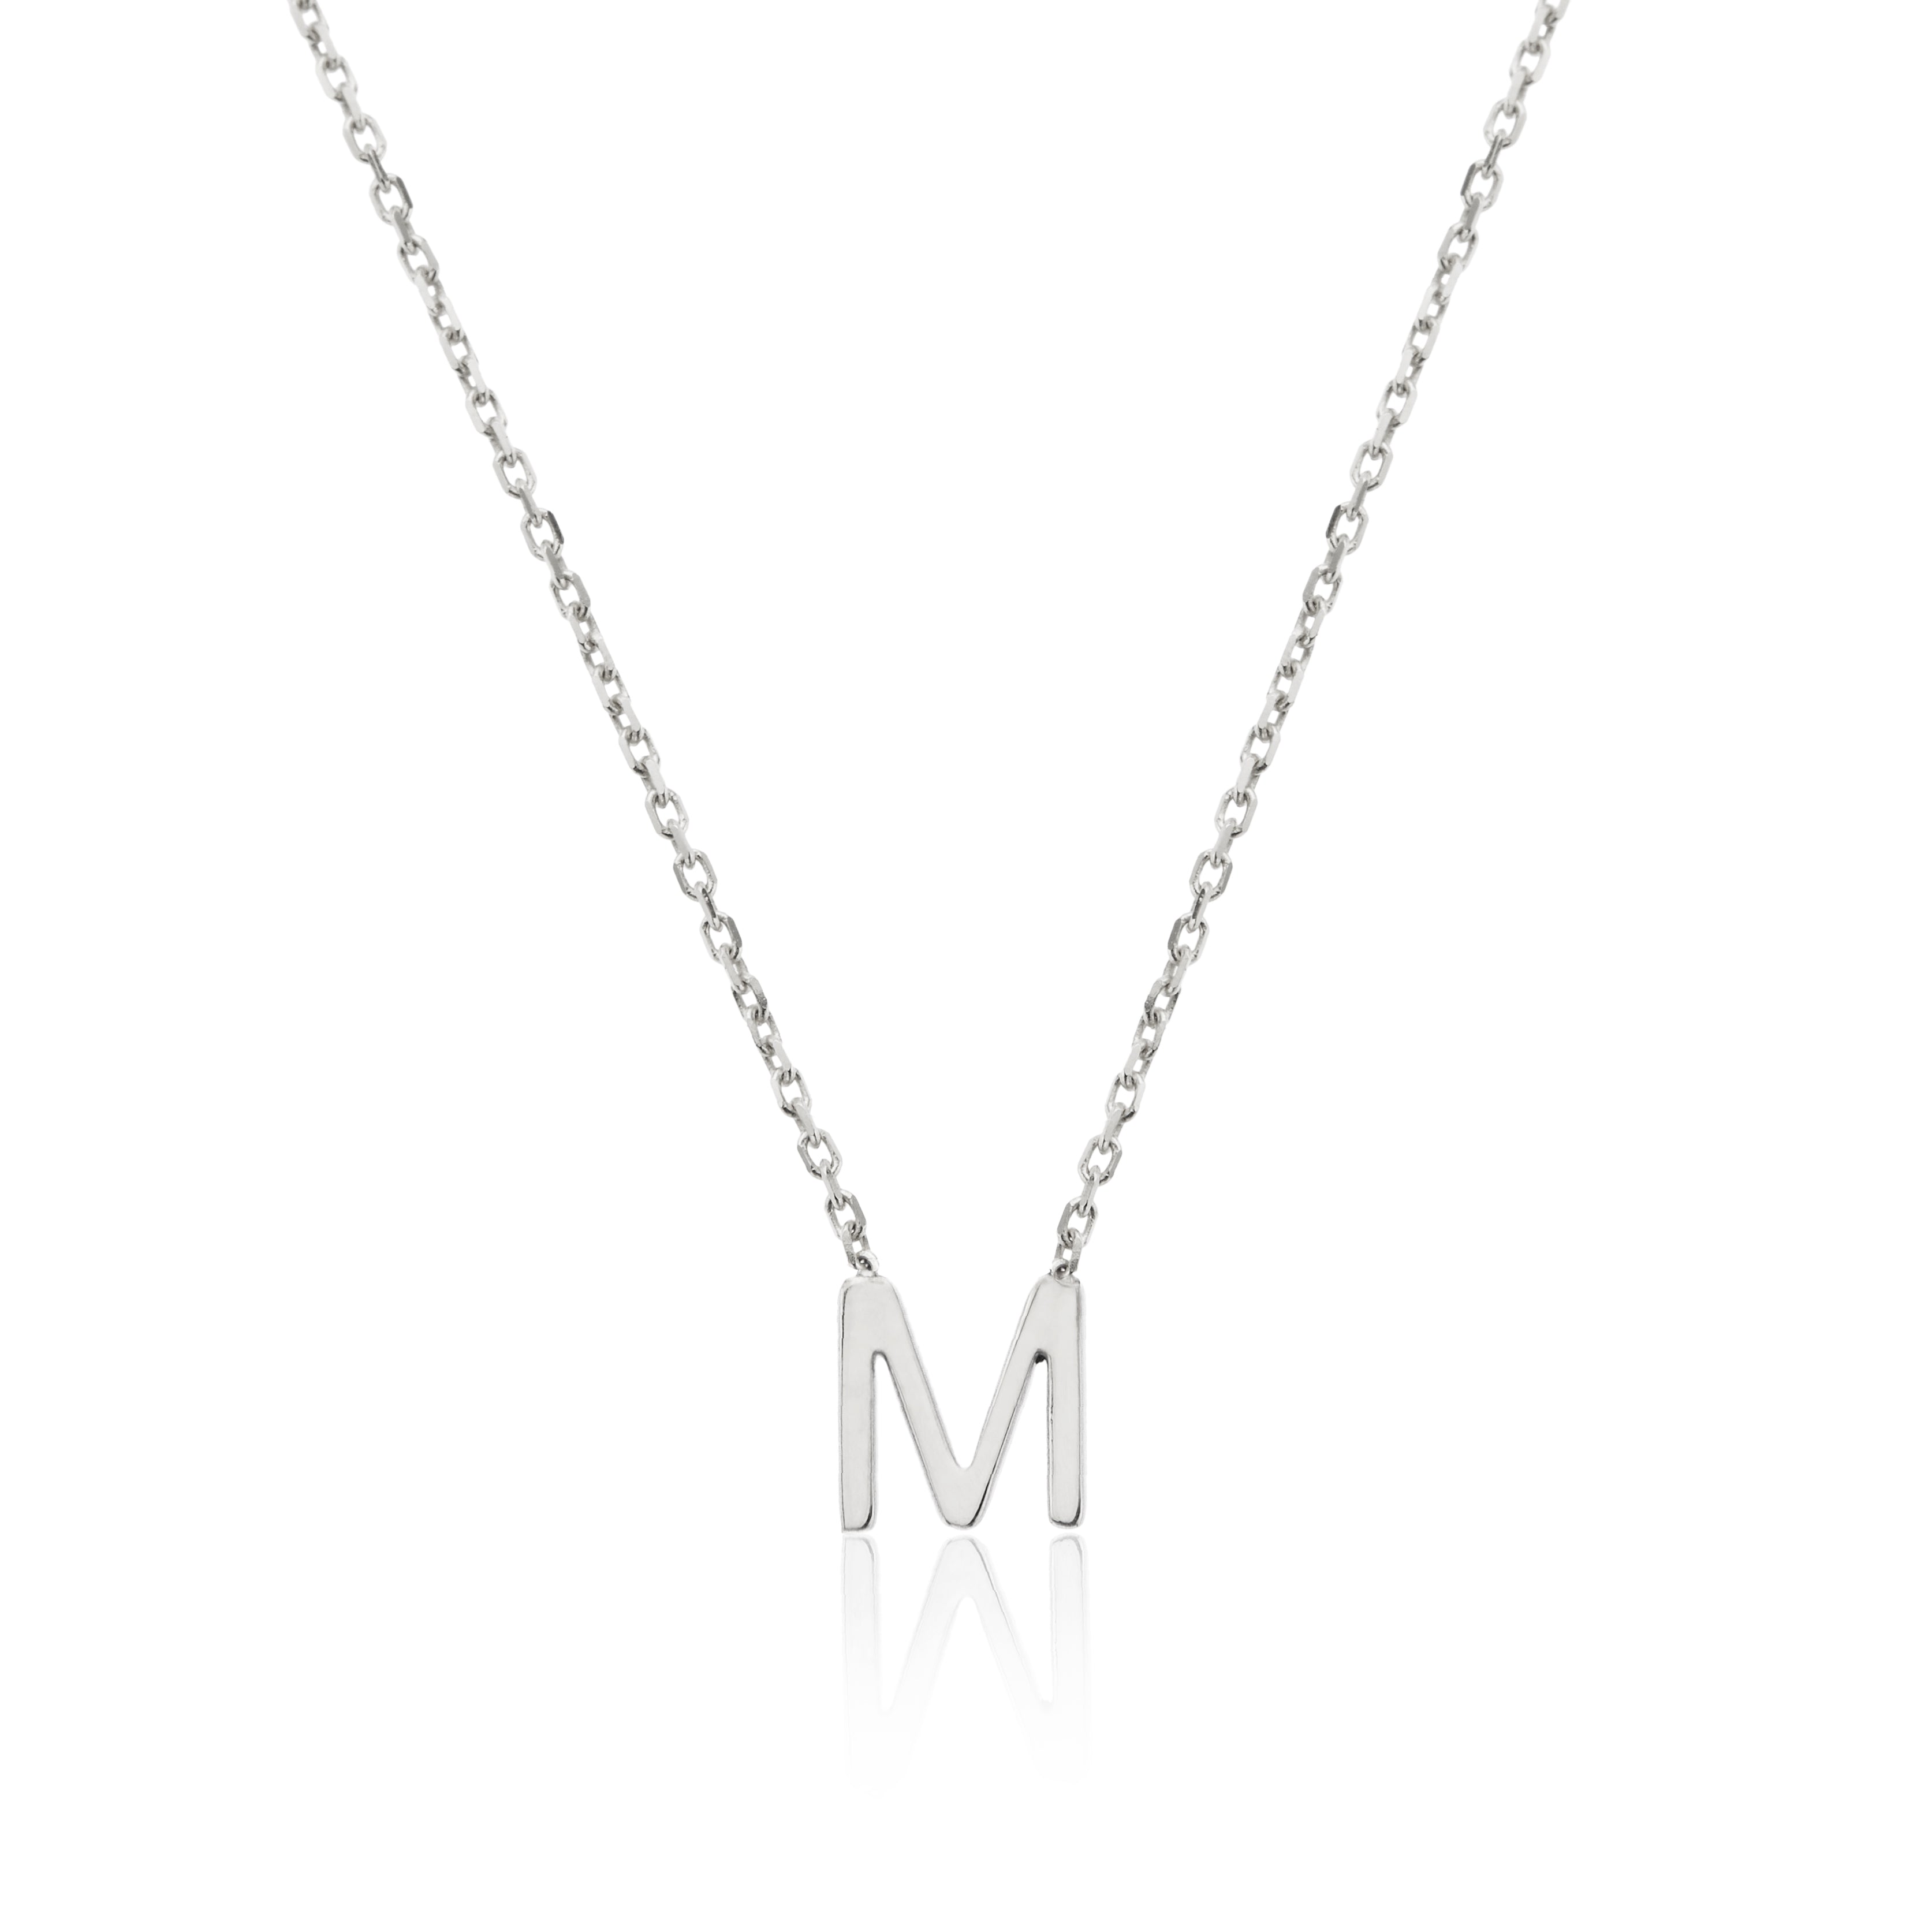 Solid White Gold Miniature Initial Letter Necklace